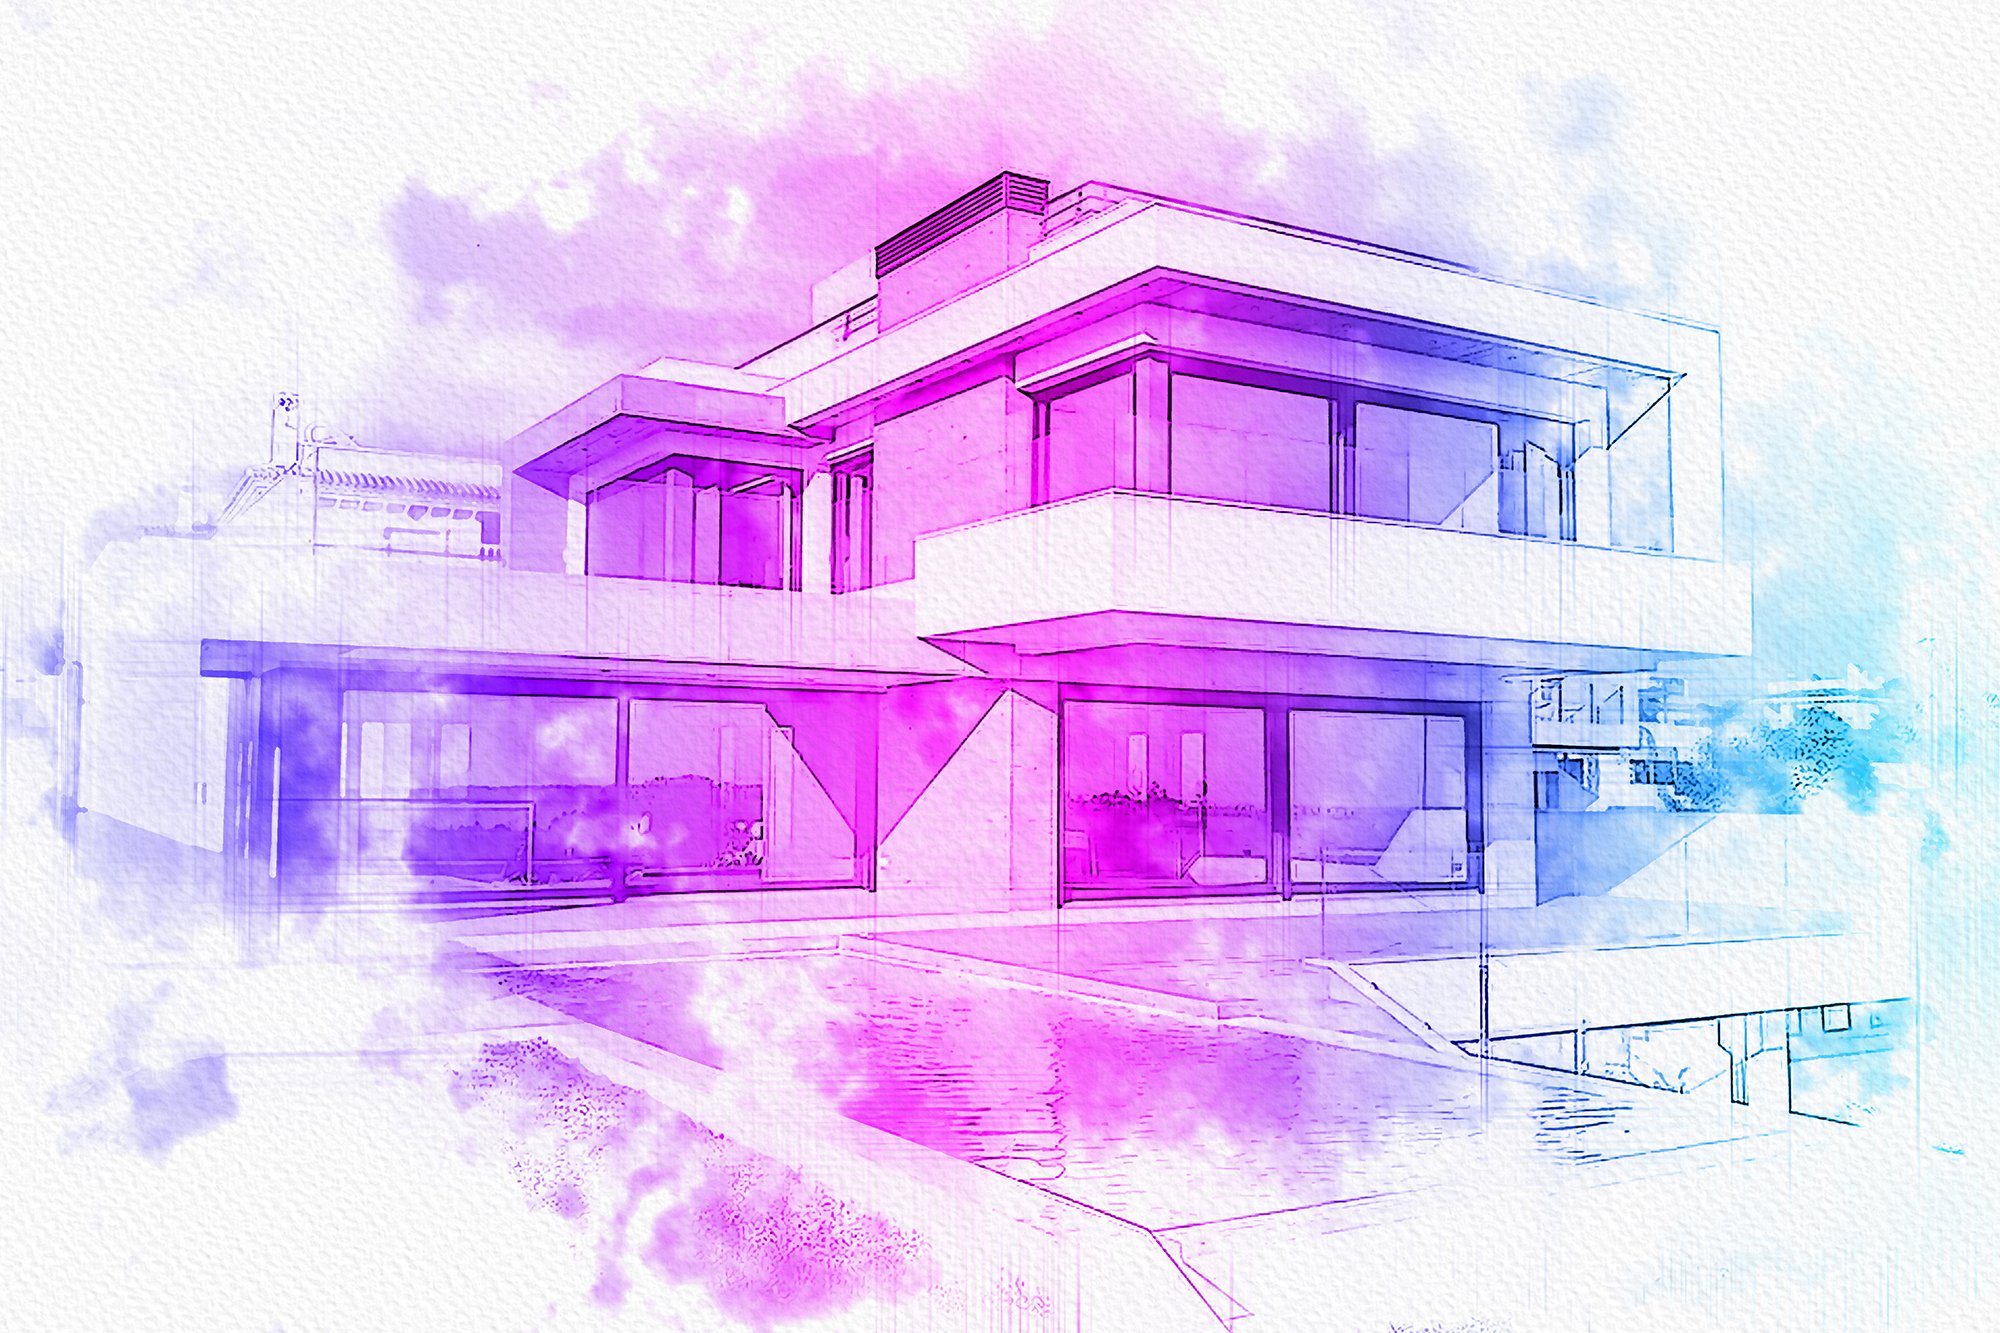 Watercolor Painting Sketch Effectpreview image.